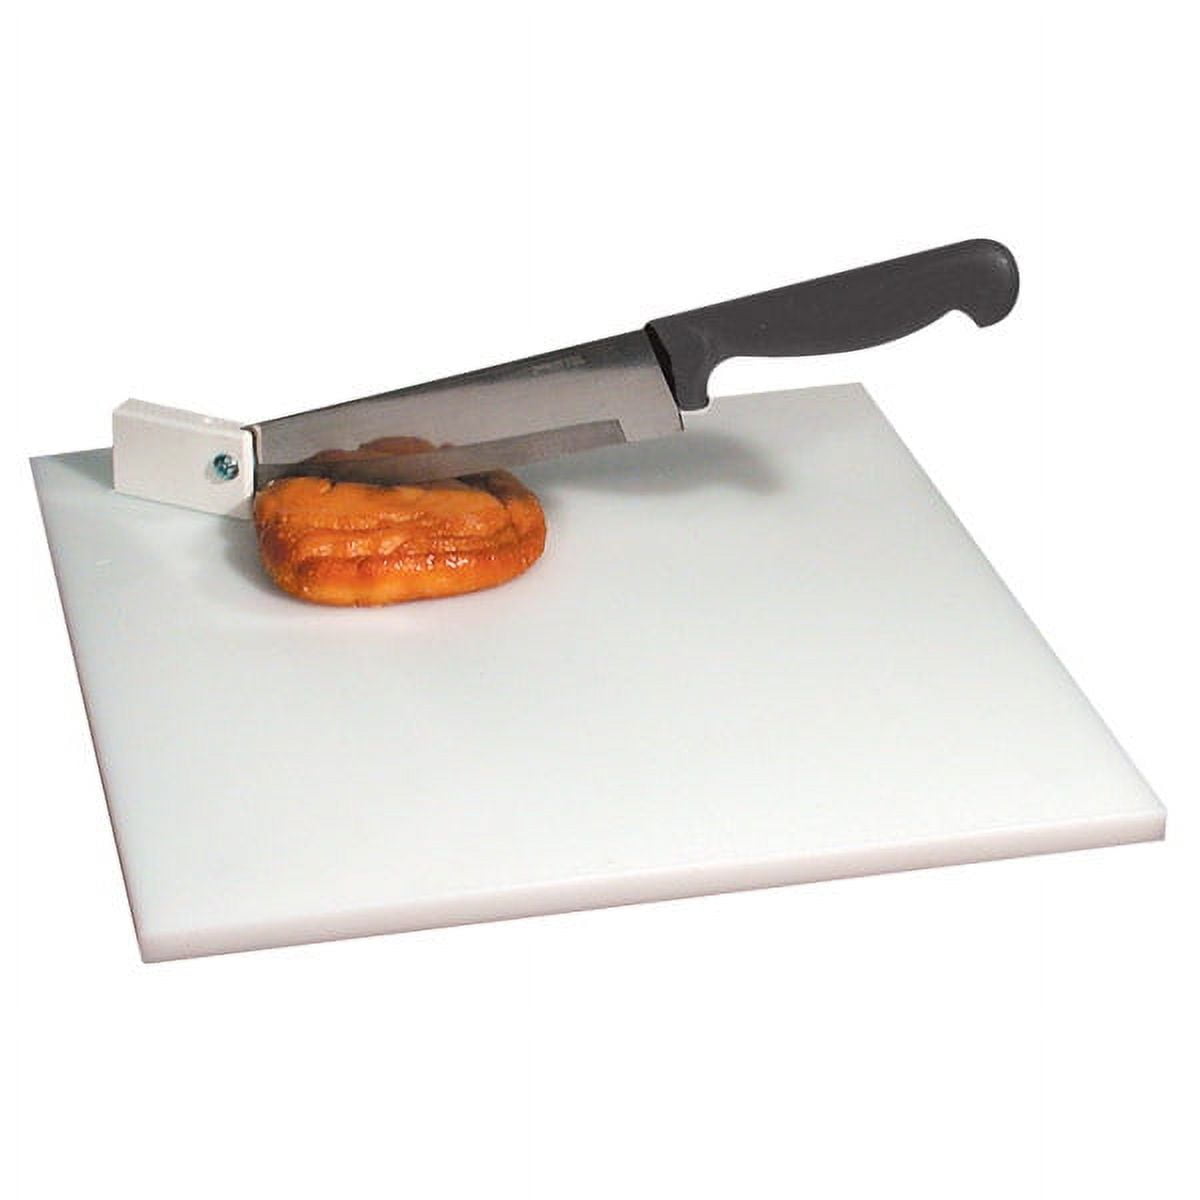 This travel cutting board with a built-in knife cuts out the